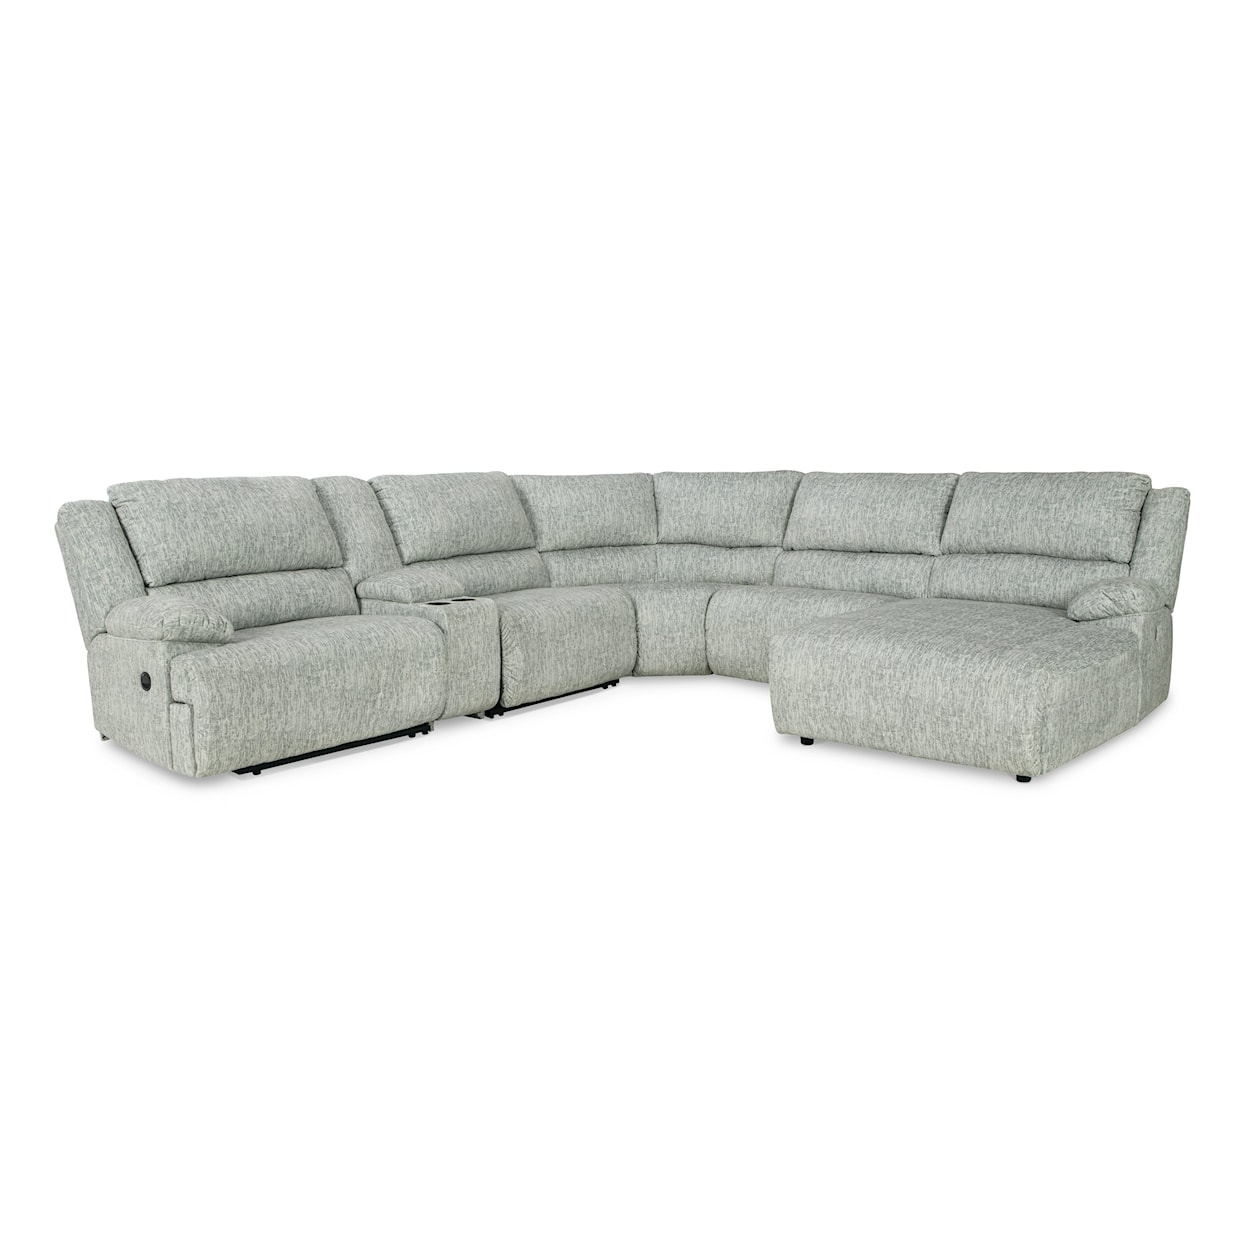 Michael Alan Select McClelland 6-Piece Reclining Sectional with Chaise